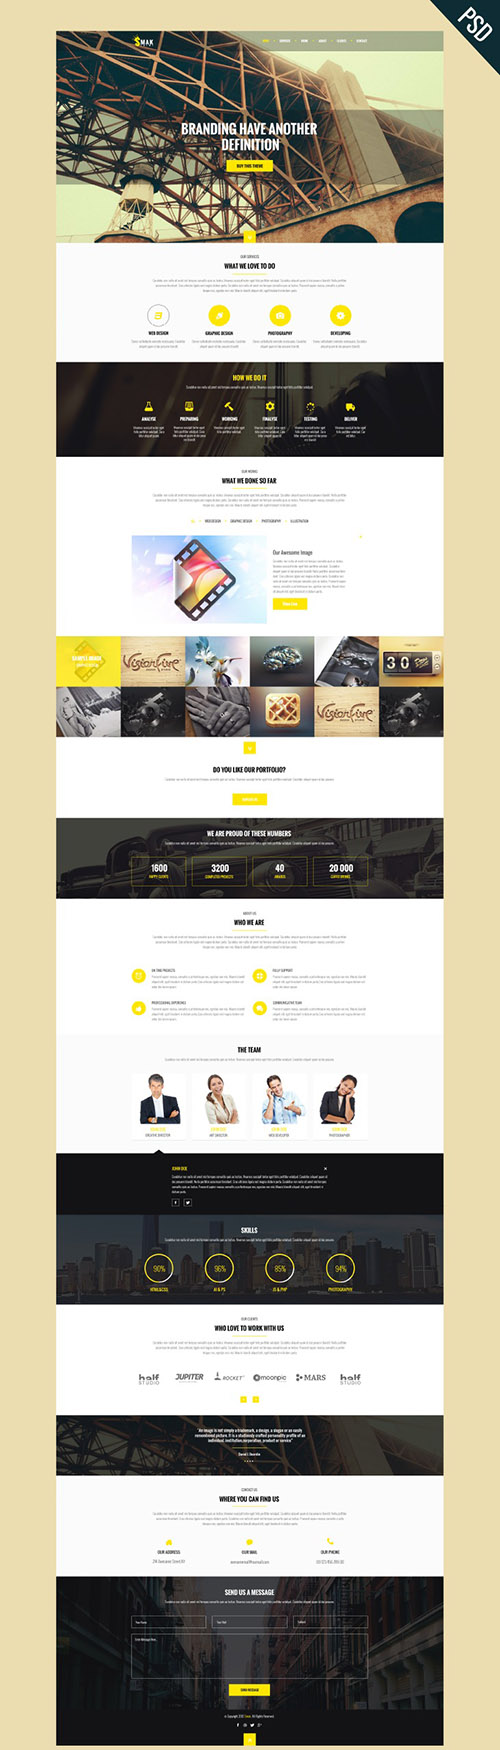 PSD Web Template - Smak - One Page